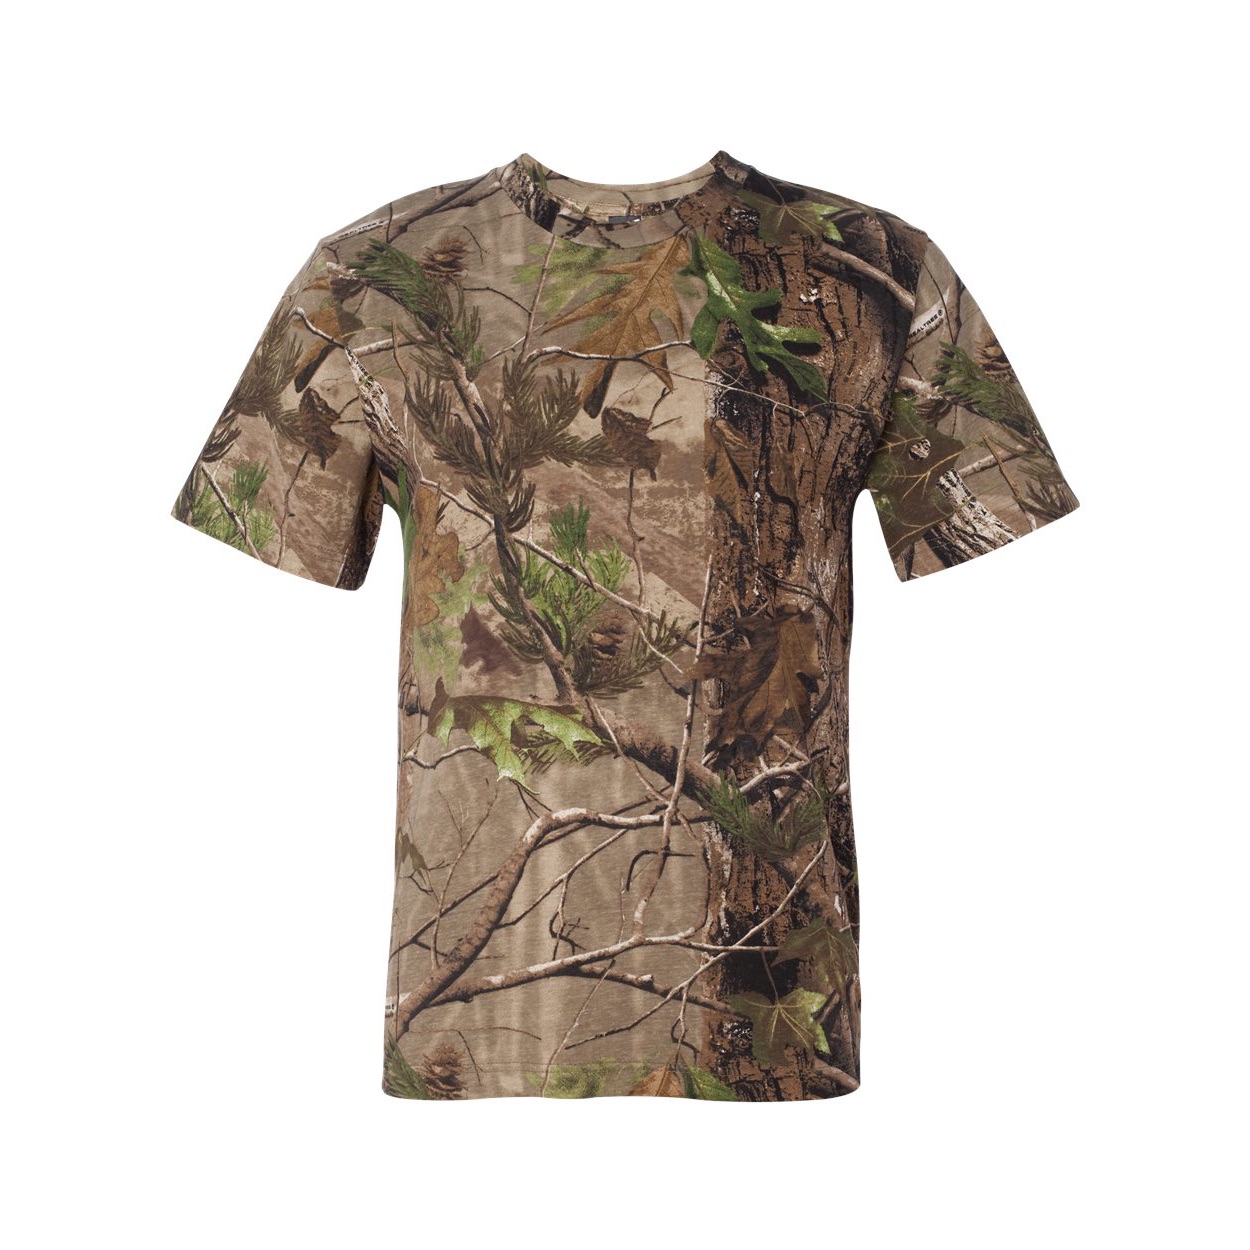 Product Details: Shirt Classic Camo RealTree APG (Code Five - Adult Realtree® Camo Tee - 3980)